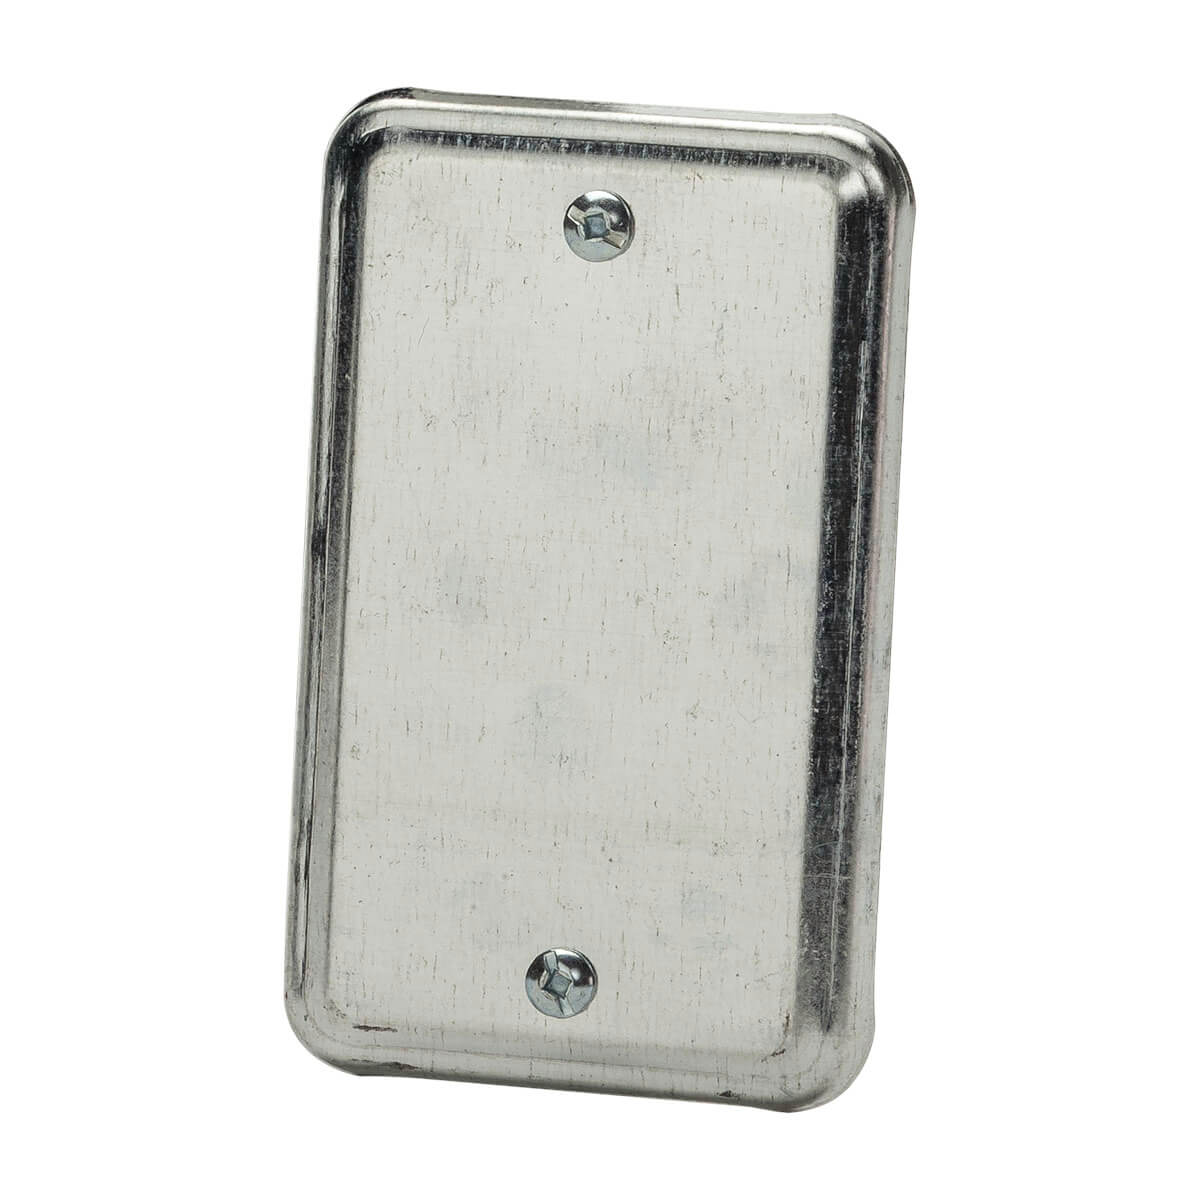 Utility Box Cover - Blank Cover